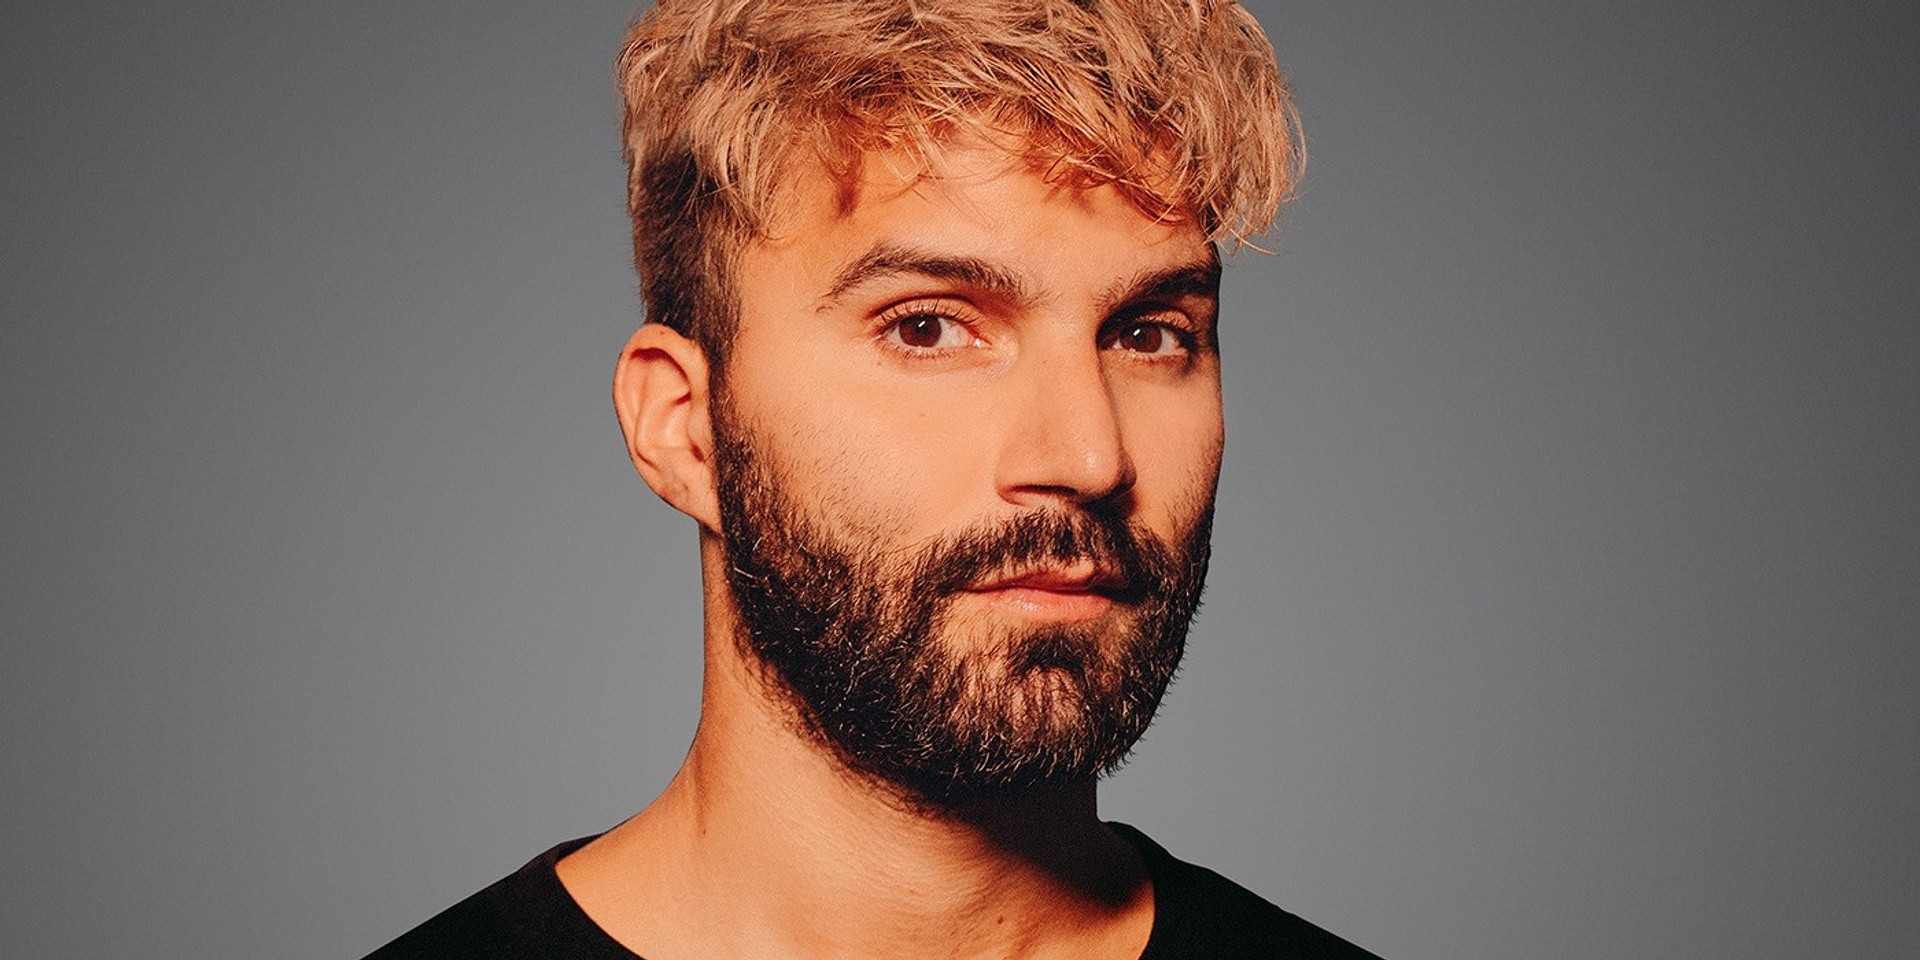 R3HAB on staying motivated, working with K-pop idols, and returning to Asia